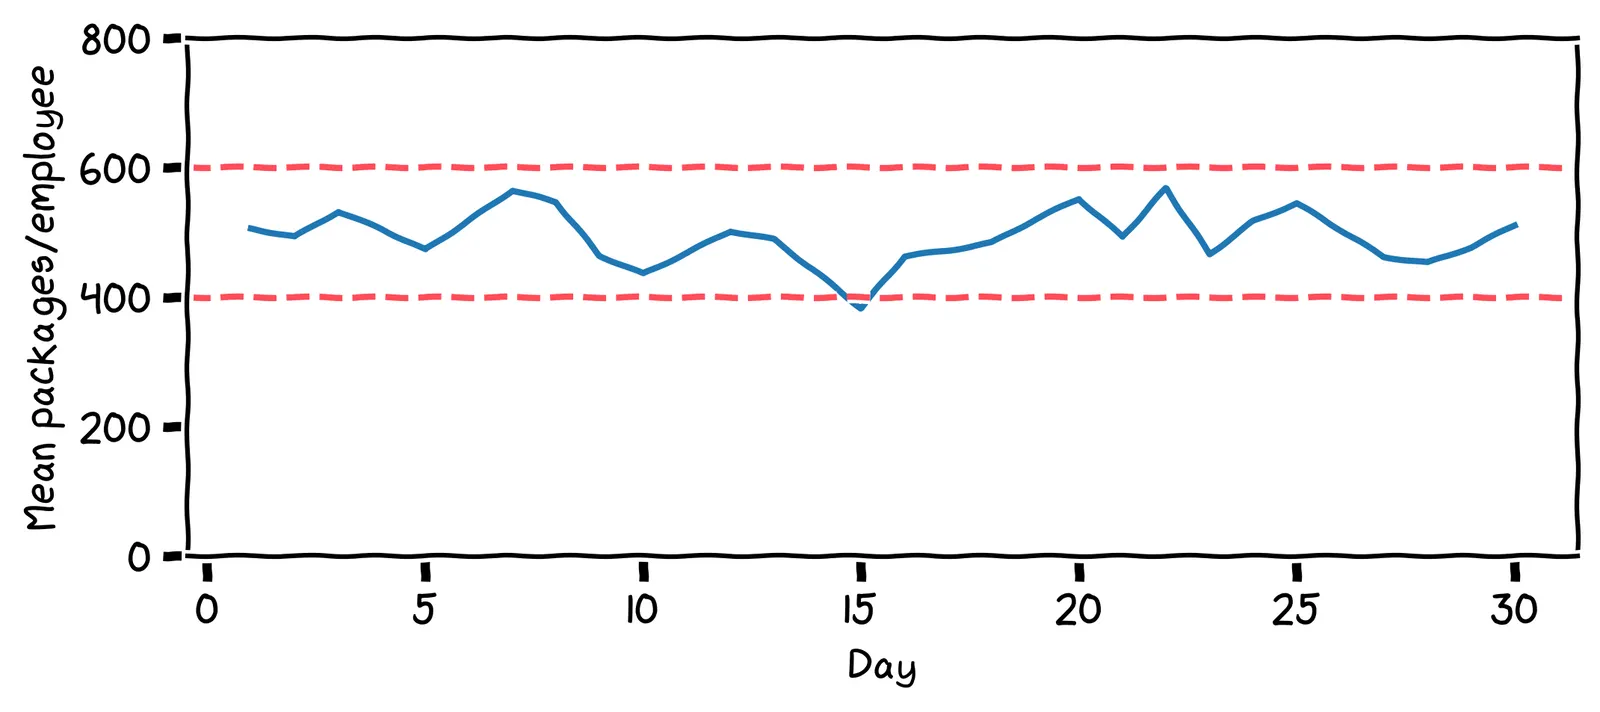 A chart with a timeseries of the mean number of packages per employee per day. It goes back 30 days. The value hovers around 500. There's a horizontal line on the chart at 400 packages, and a horizontal line at 600 packages.